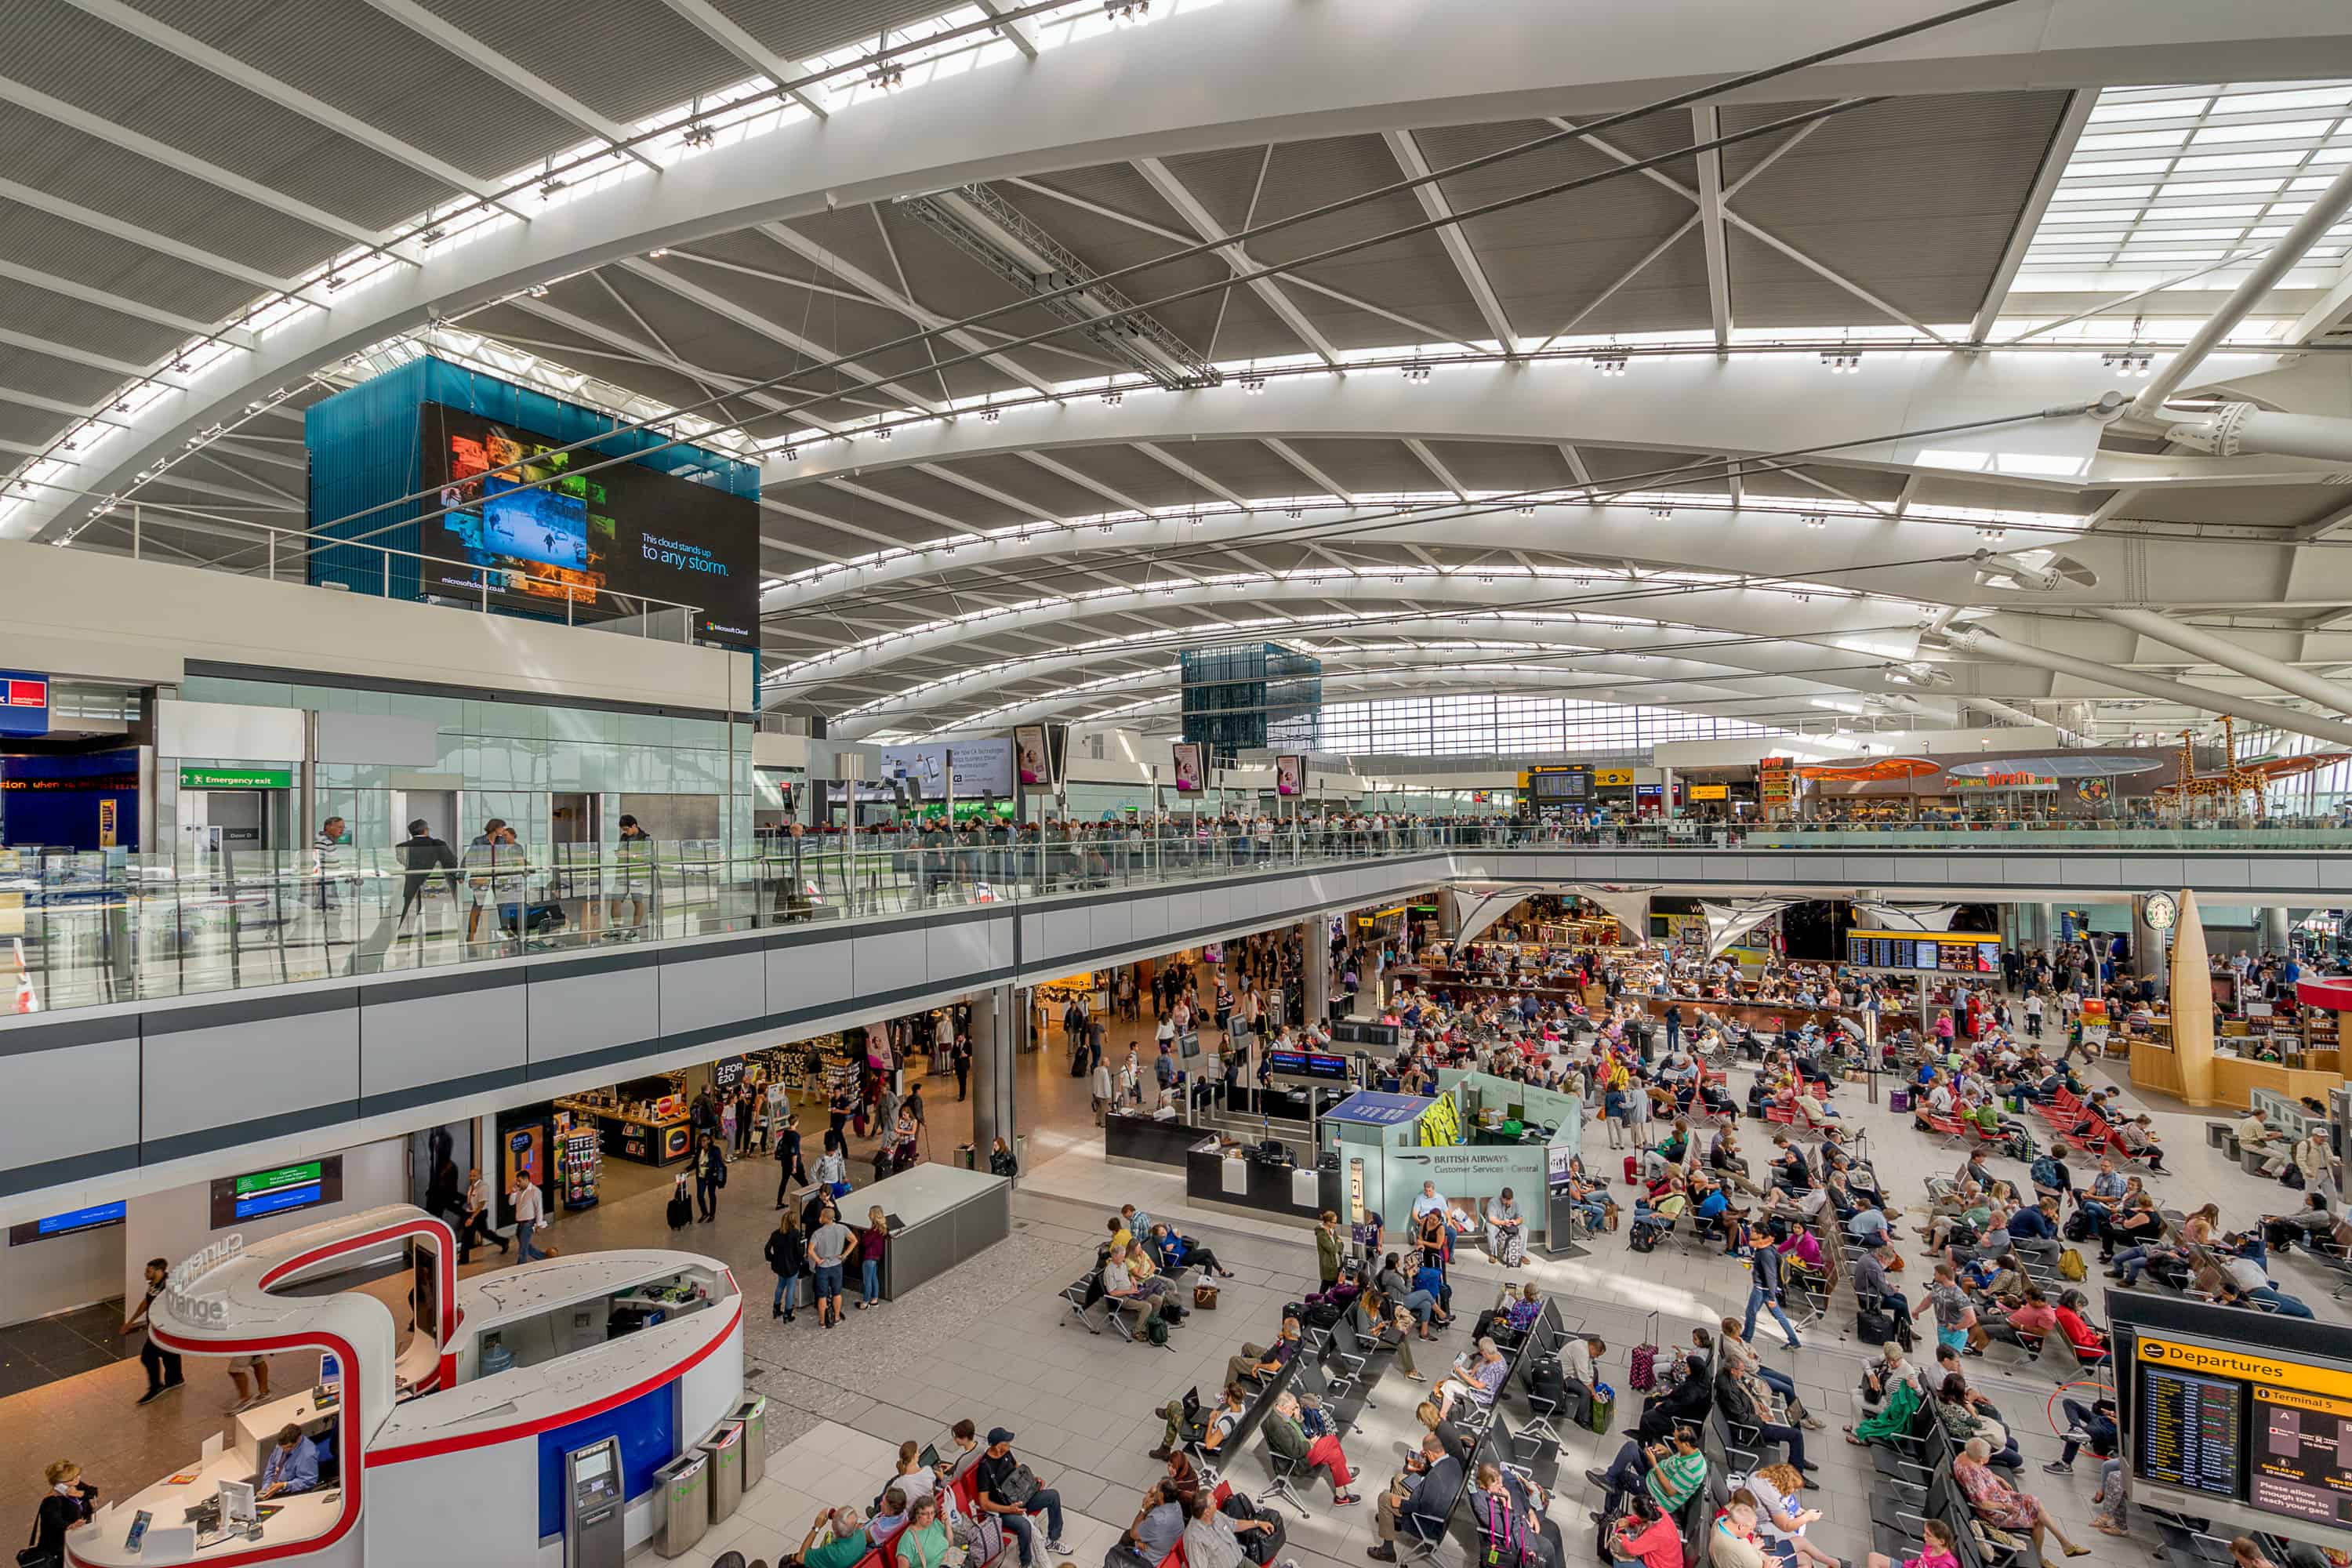 The Busiest Airports In Europe, Ranked